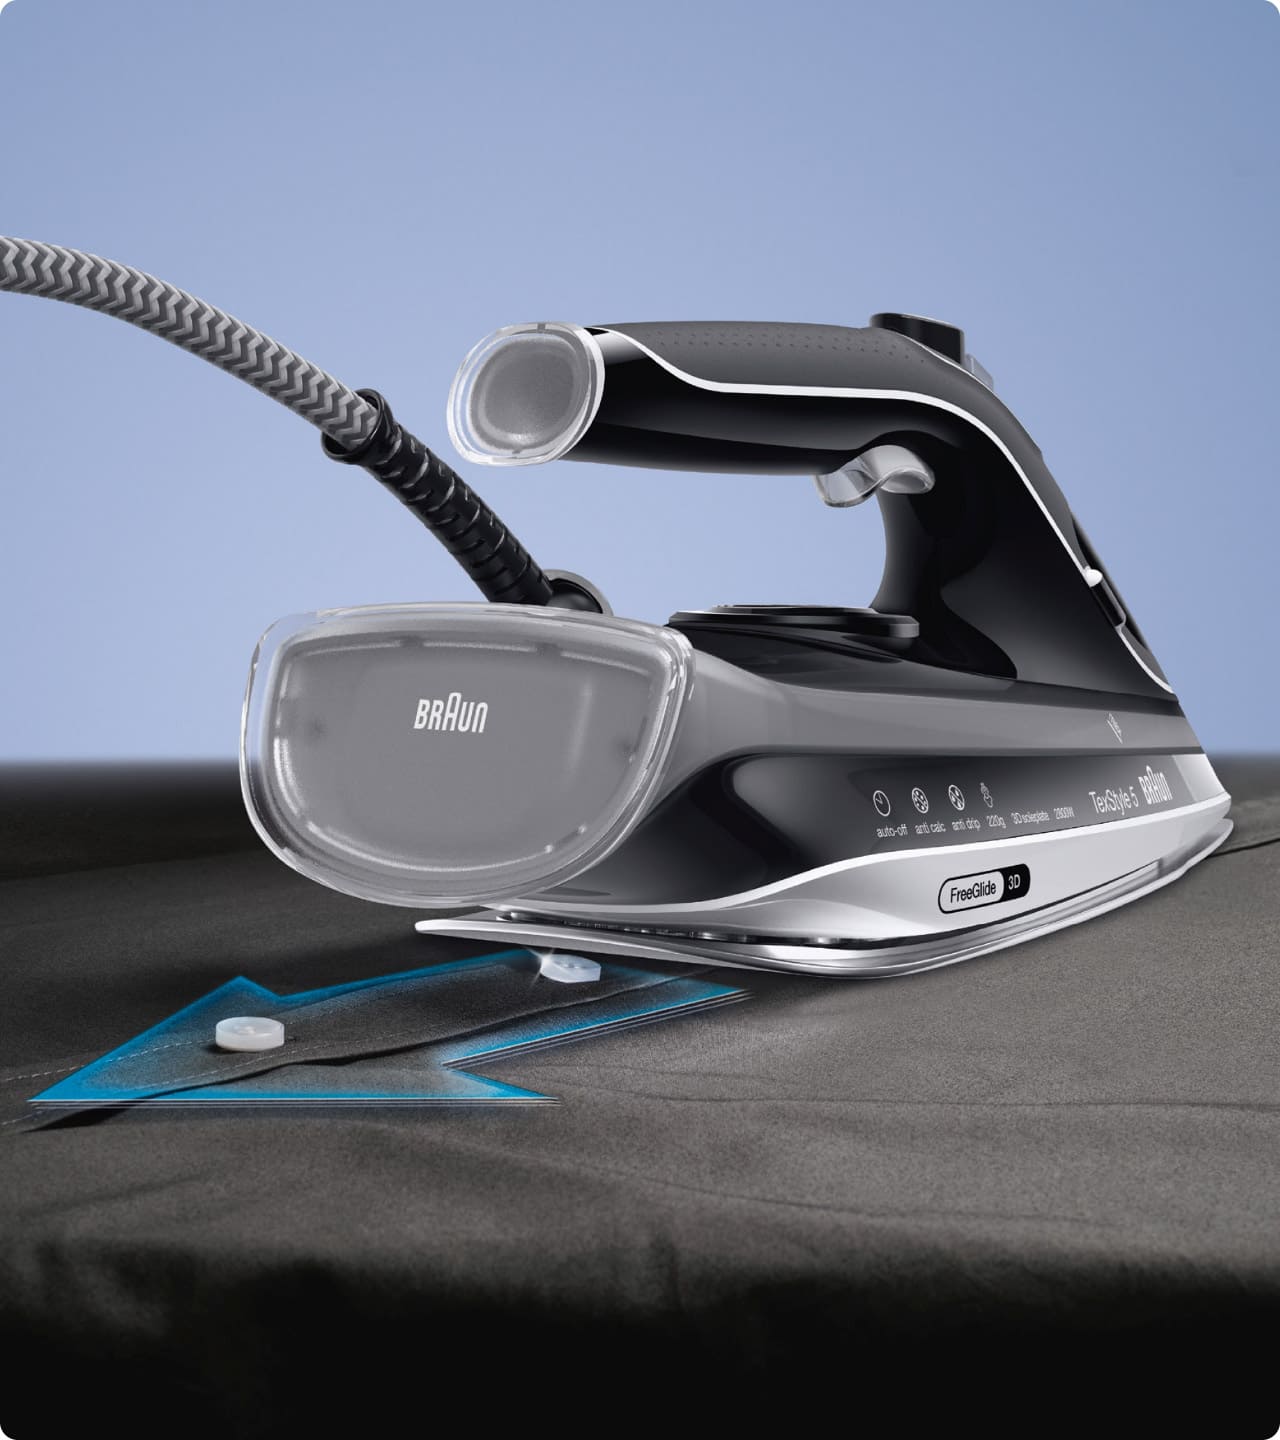 World's first FreeGlide 3D Technology. Saving you time and trouble.